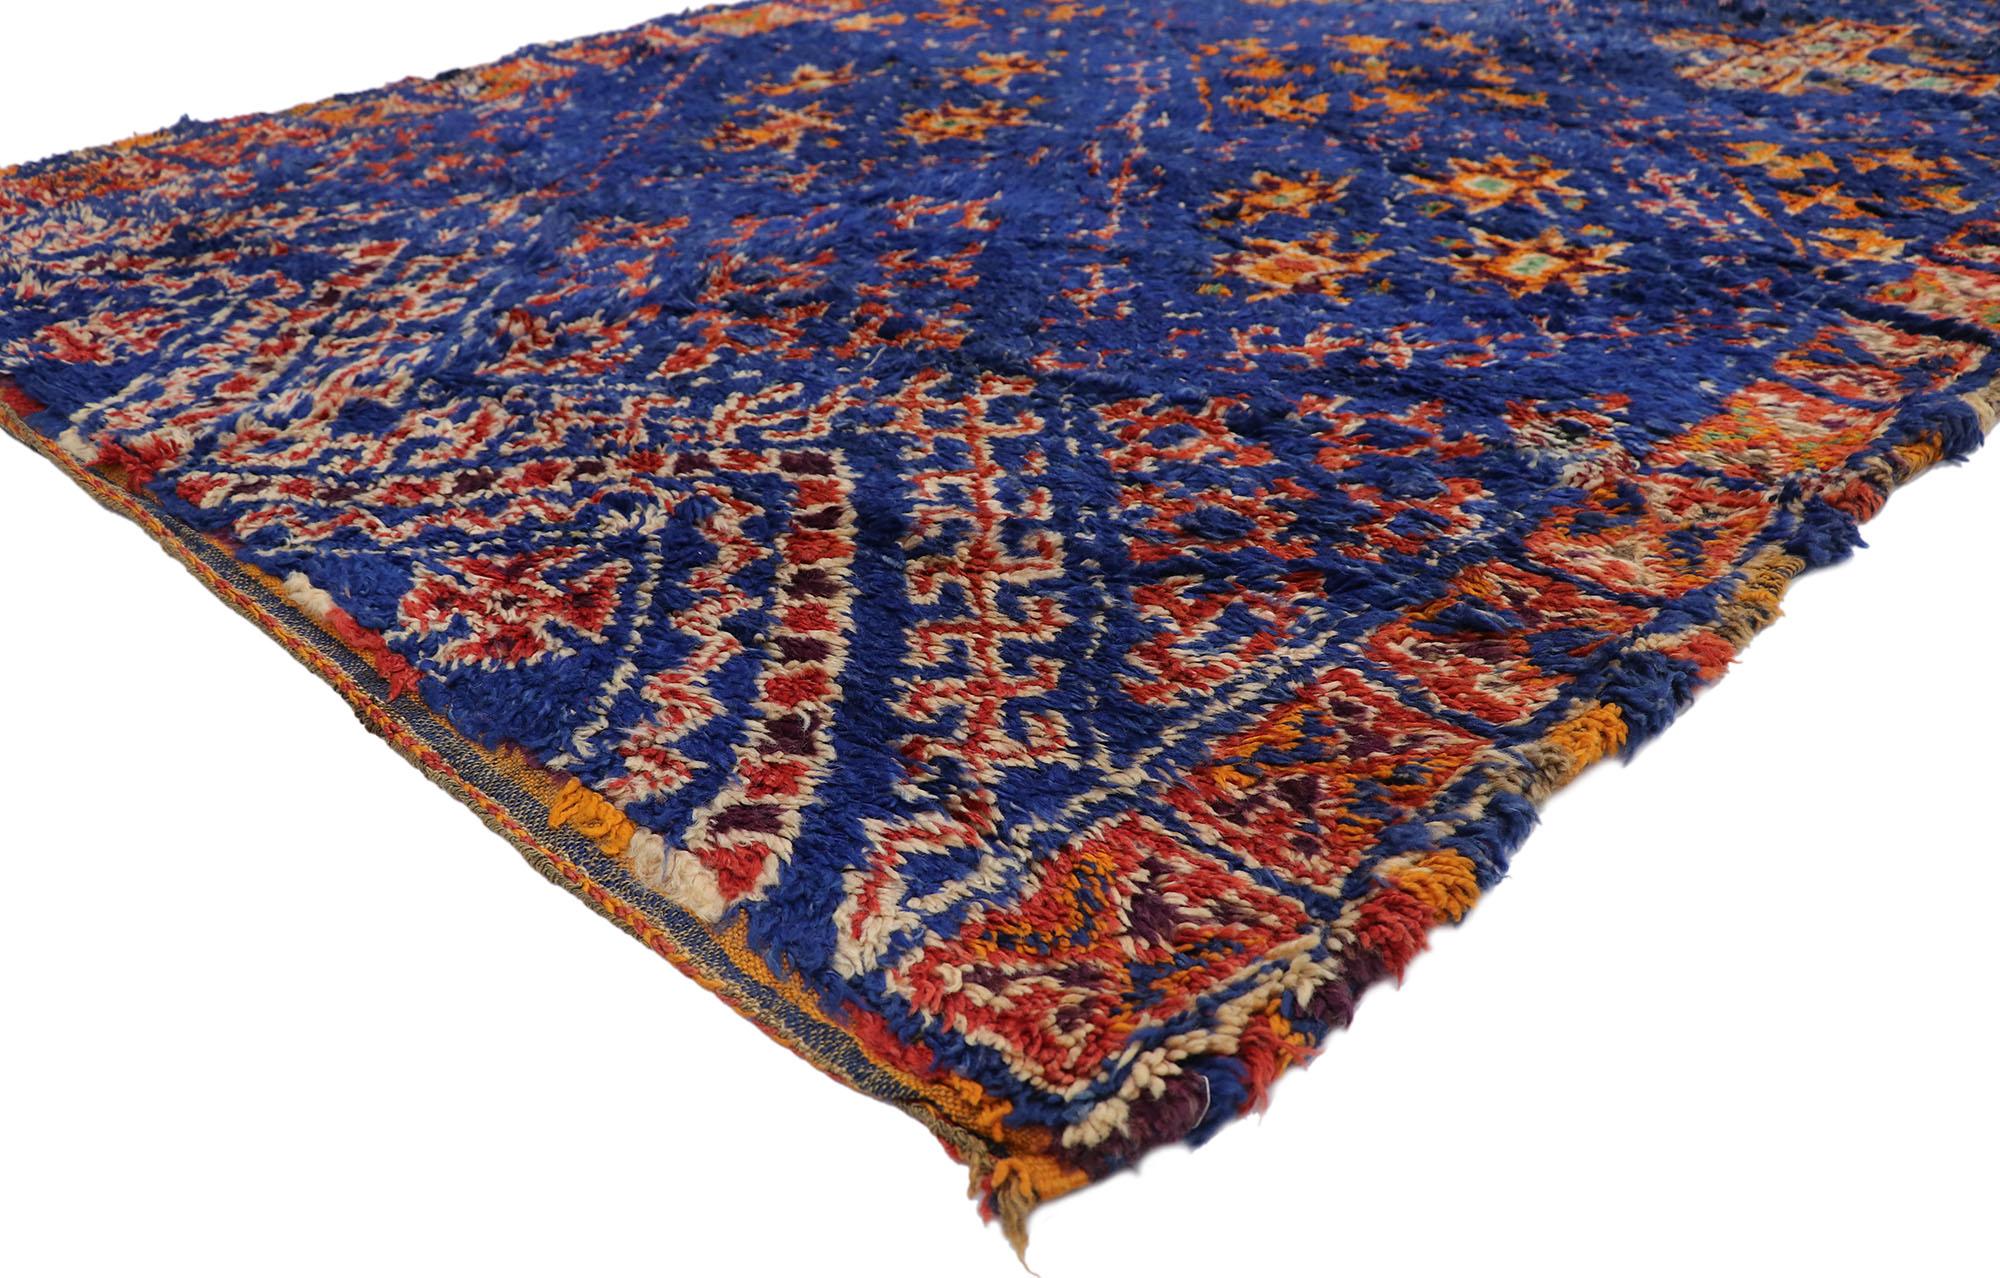 21501 Vintage blue Beni M'Guild Moroccan rug with Tribal Style. Measures: 06'03 x 09'05. Showcasing a bold expressive design, incredible detail and texture, this hand knotted wool vintage Berber blue Beni M'Guild Moroccan rug is a captivating vision